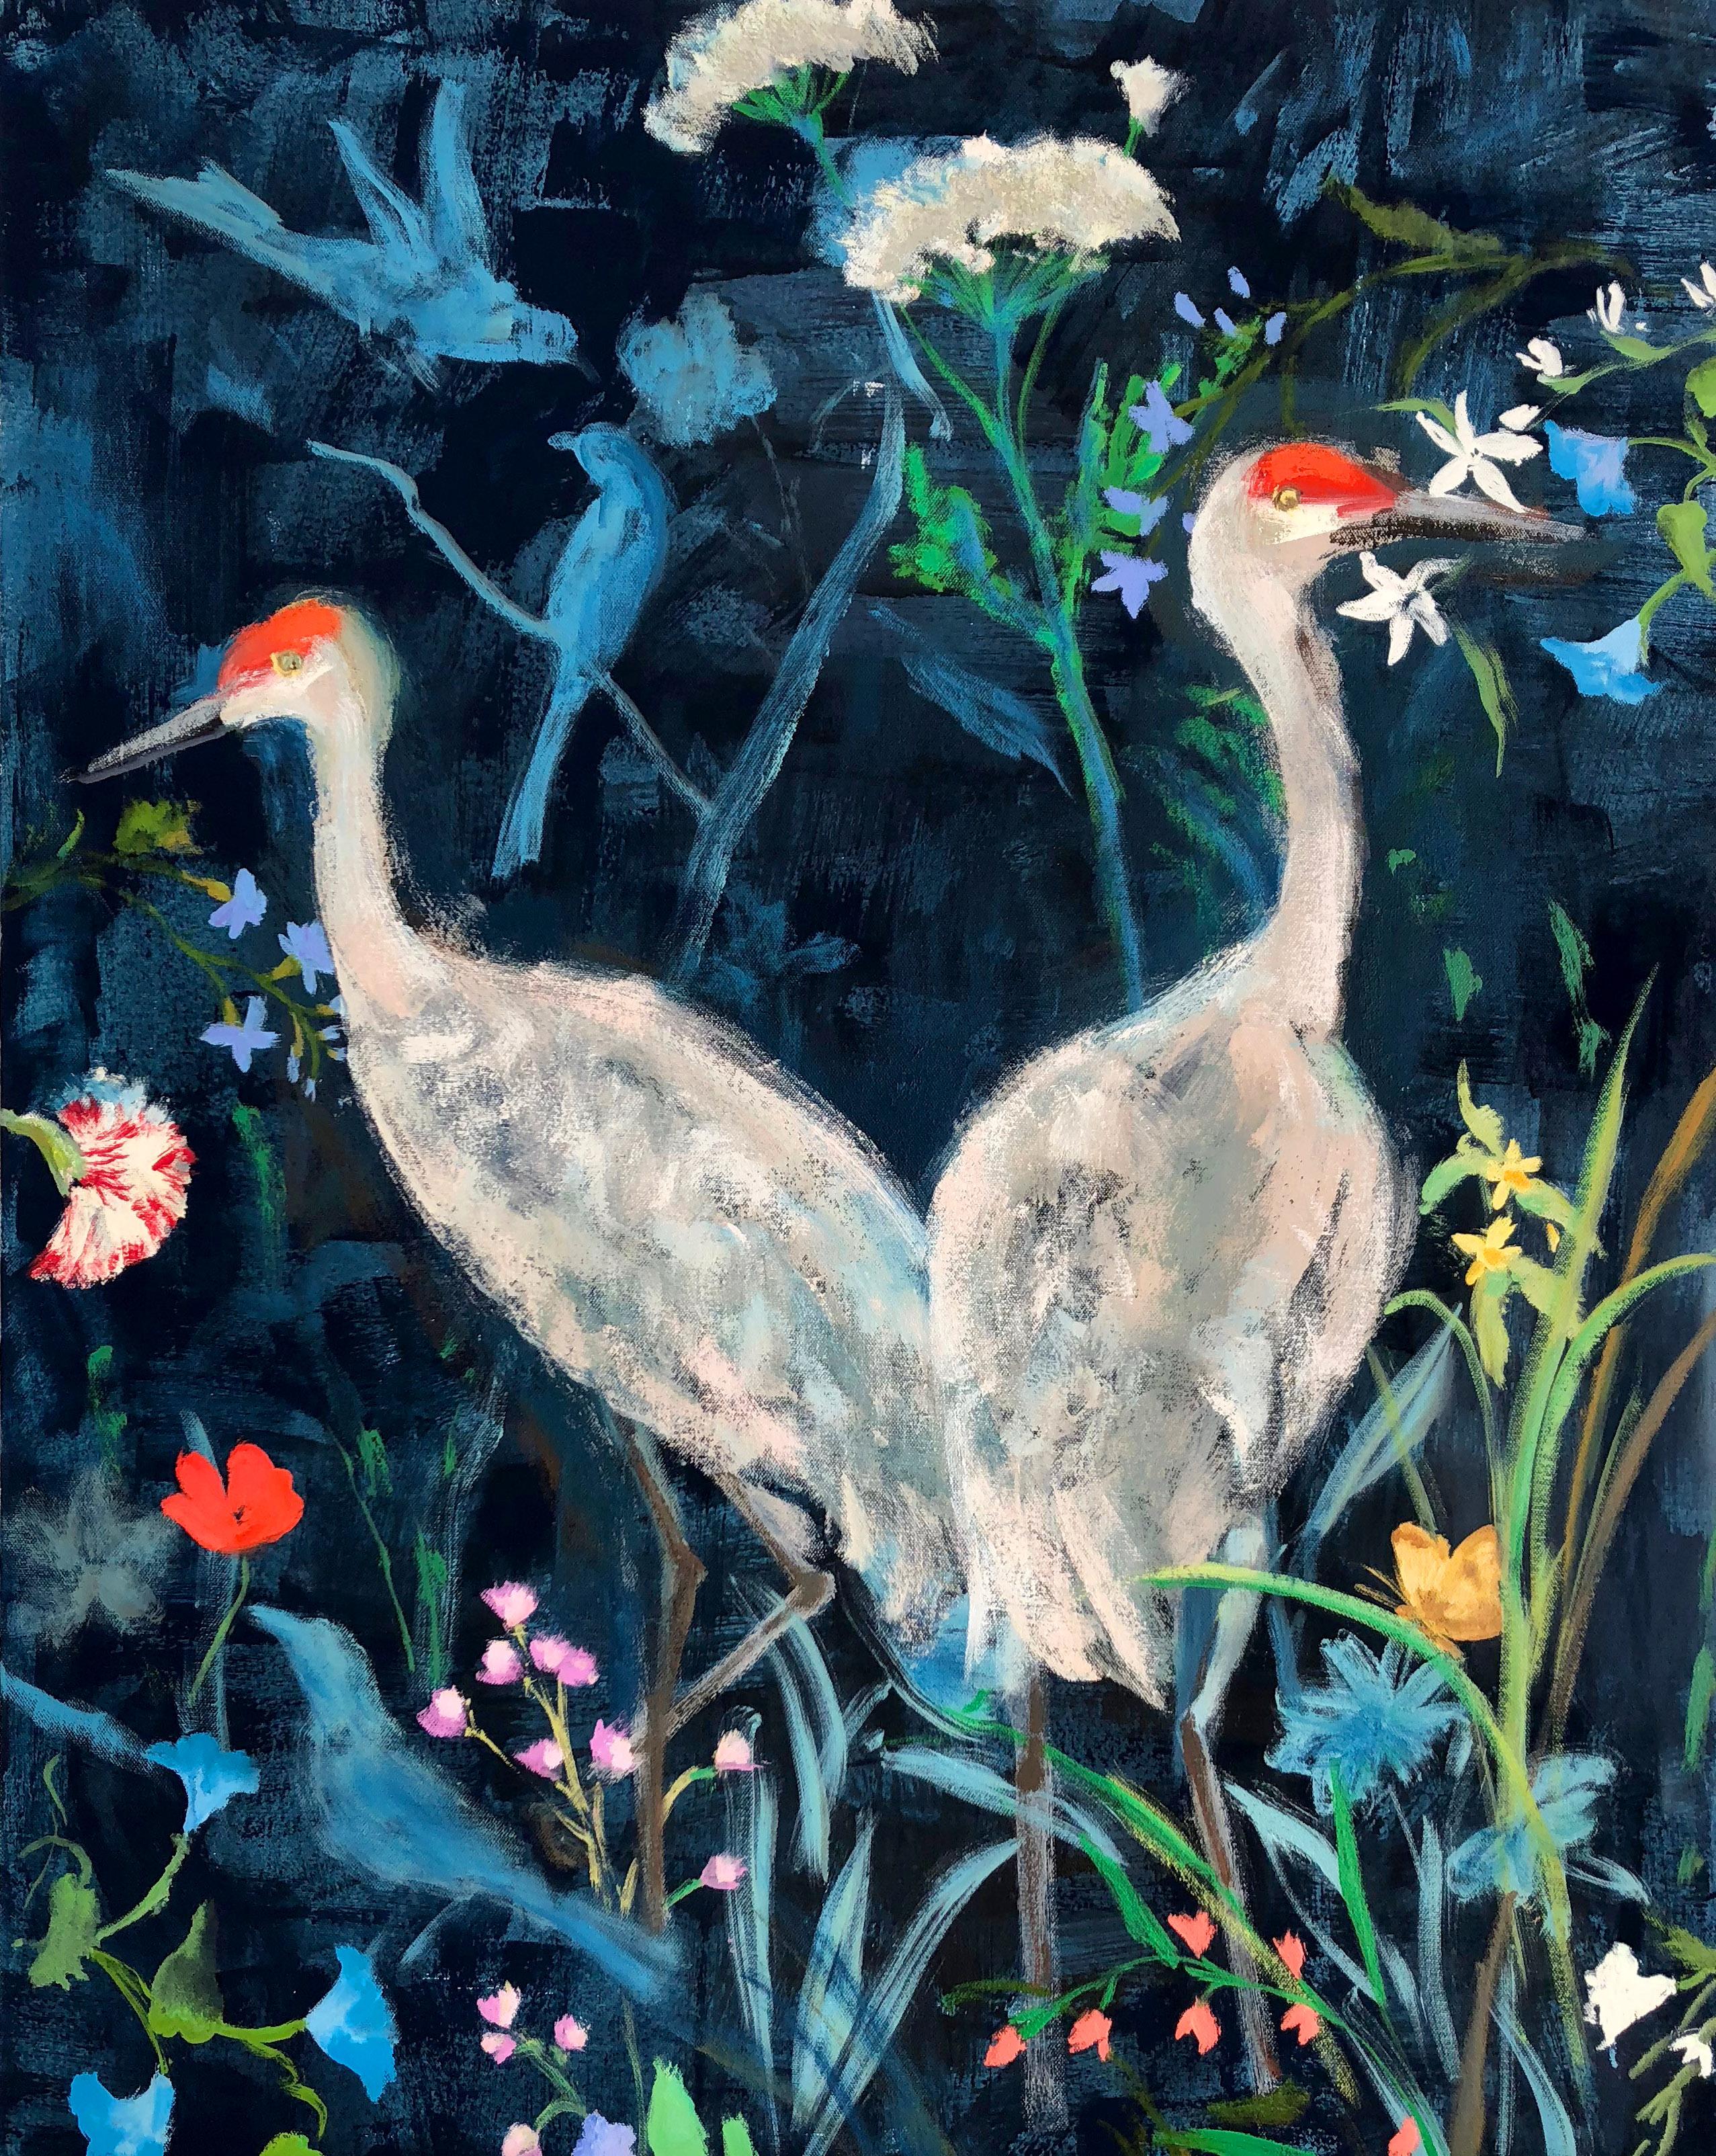 Melanie Parke Landscape Painting - Before You Thought Spring, Vertical Painting of Sandhill Crane Birds, Flowers